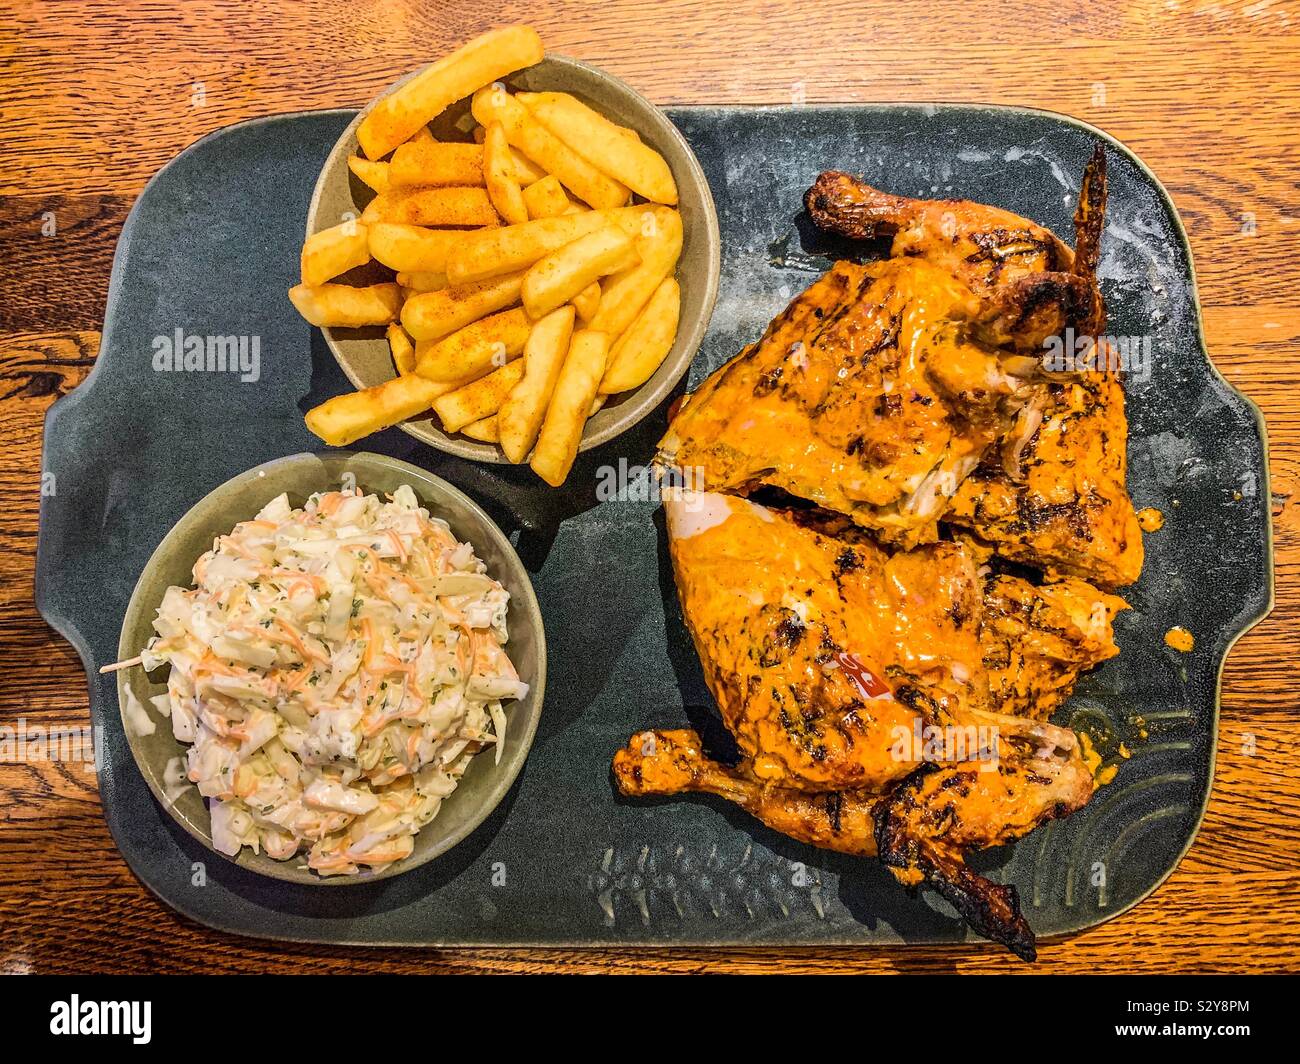 Nando’s hot chicken and chips and coleslaw on slate plate Stock Photo